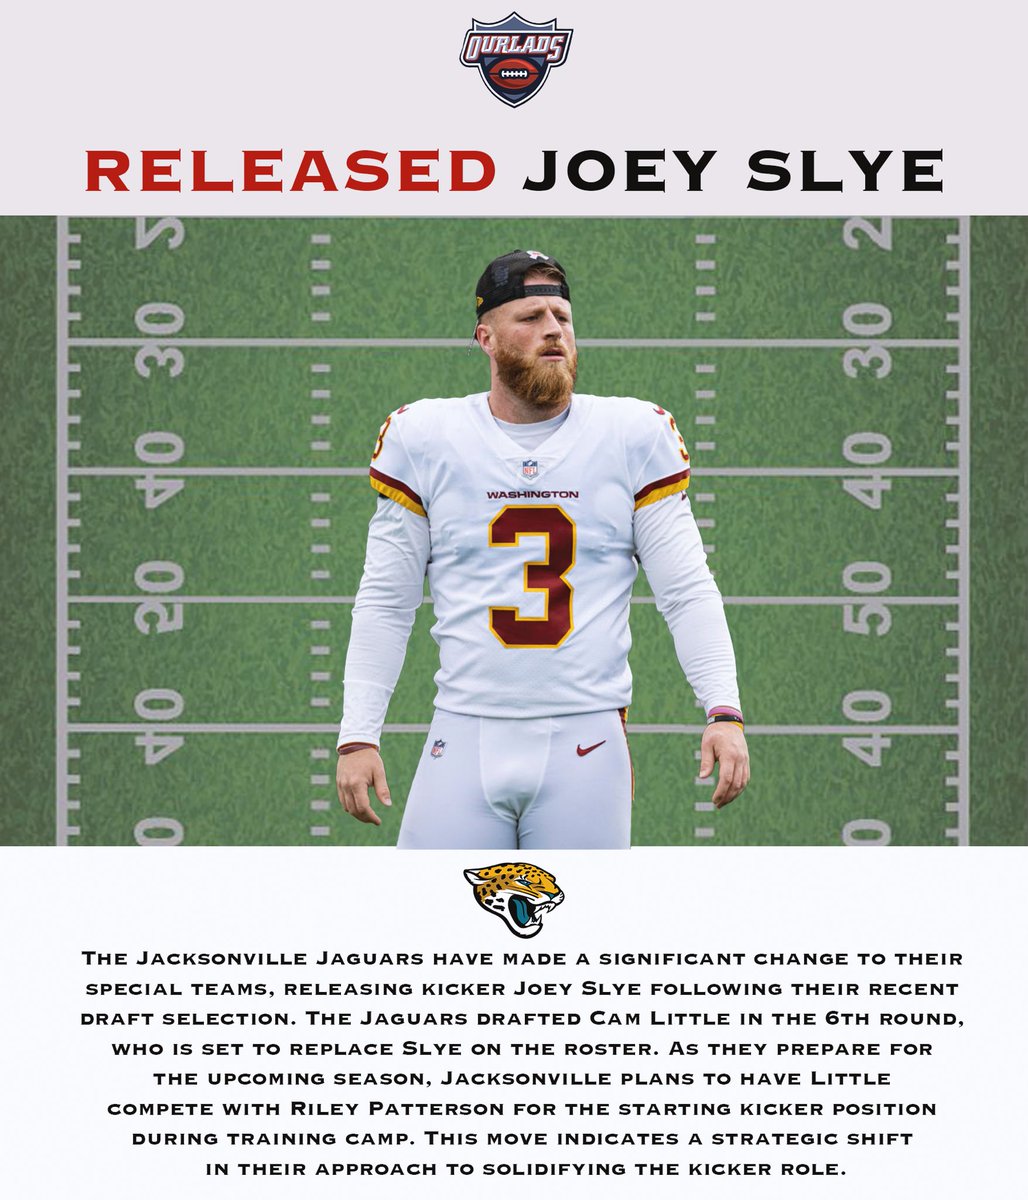 🚨 Kicking Change in Jacksonville! 🏈 The #Jaguars have released Joey Slye, making way for draft pick Cam Little. Little will compete with Riley Patterson for the starting kicker spot during training camp. Who will claim the tee? 🎯 #NFL #JacksonvilleJaguars